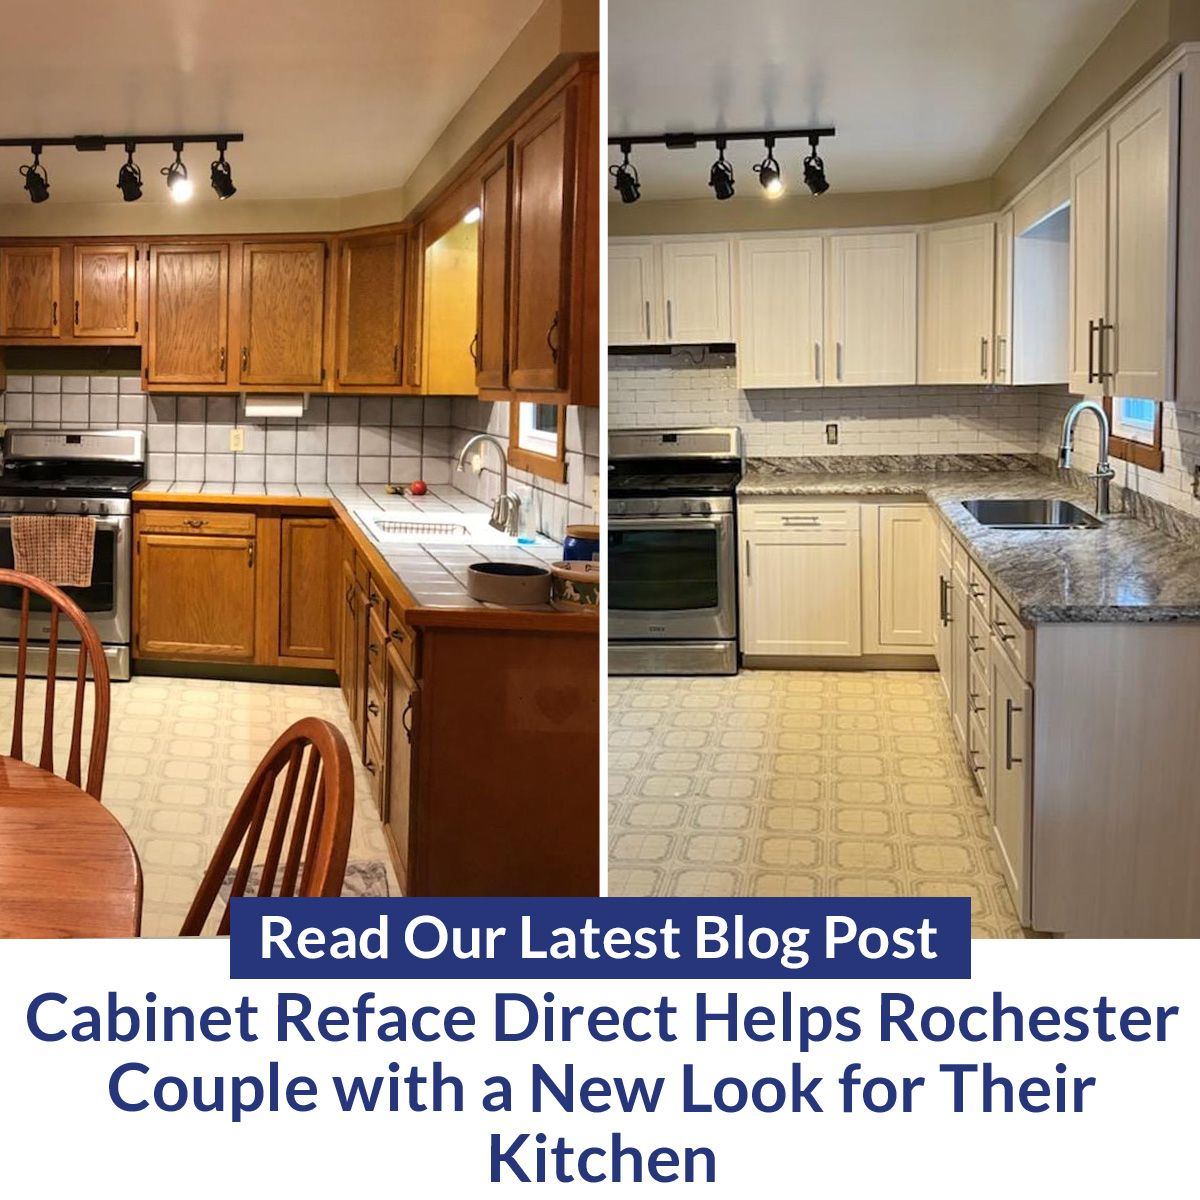 Cabinet Reface Direct Helps Rochester Couple with a New Look for Their Kitchen